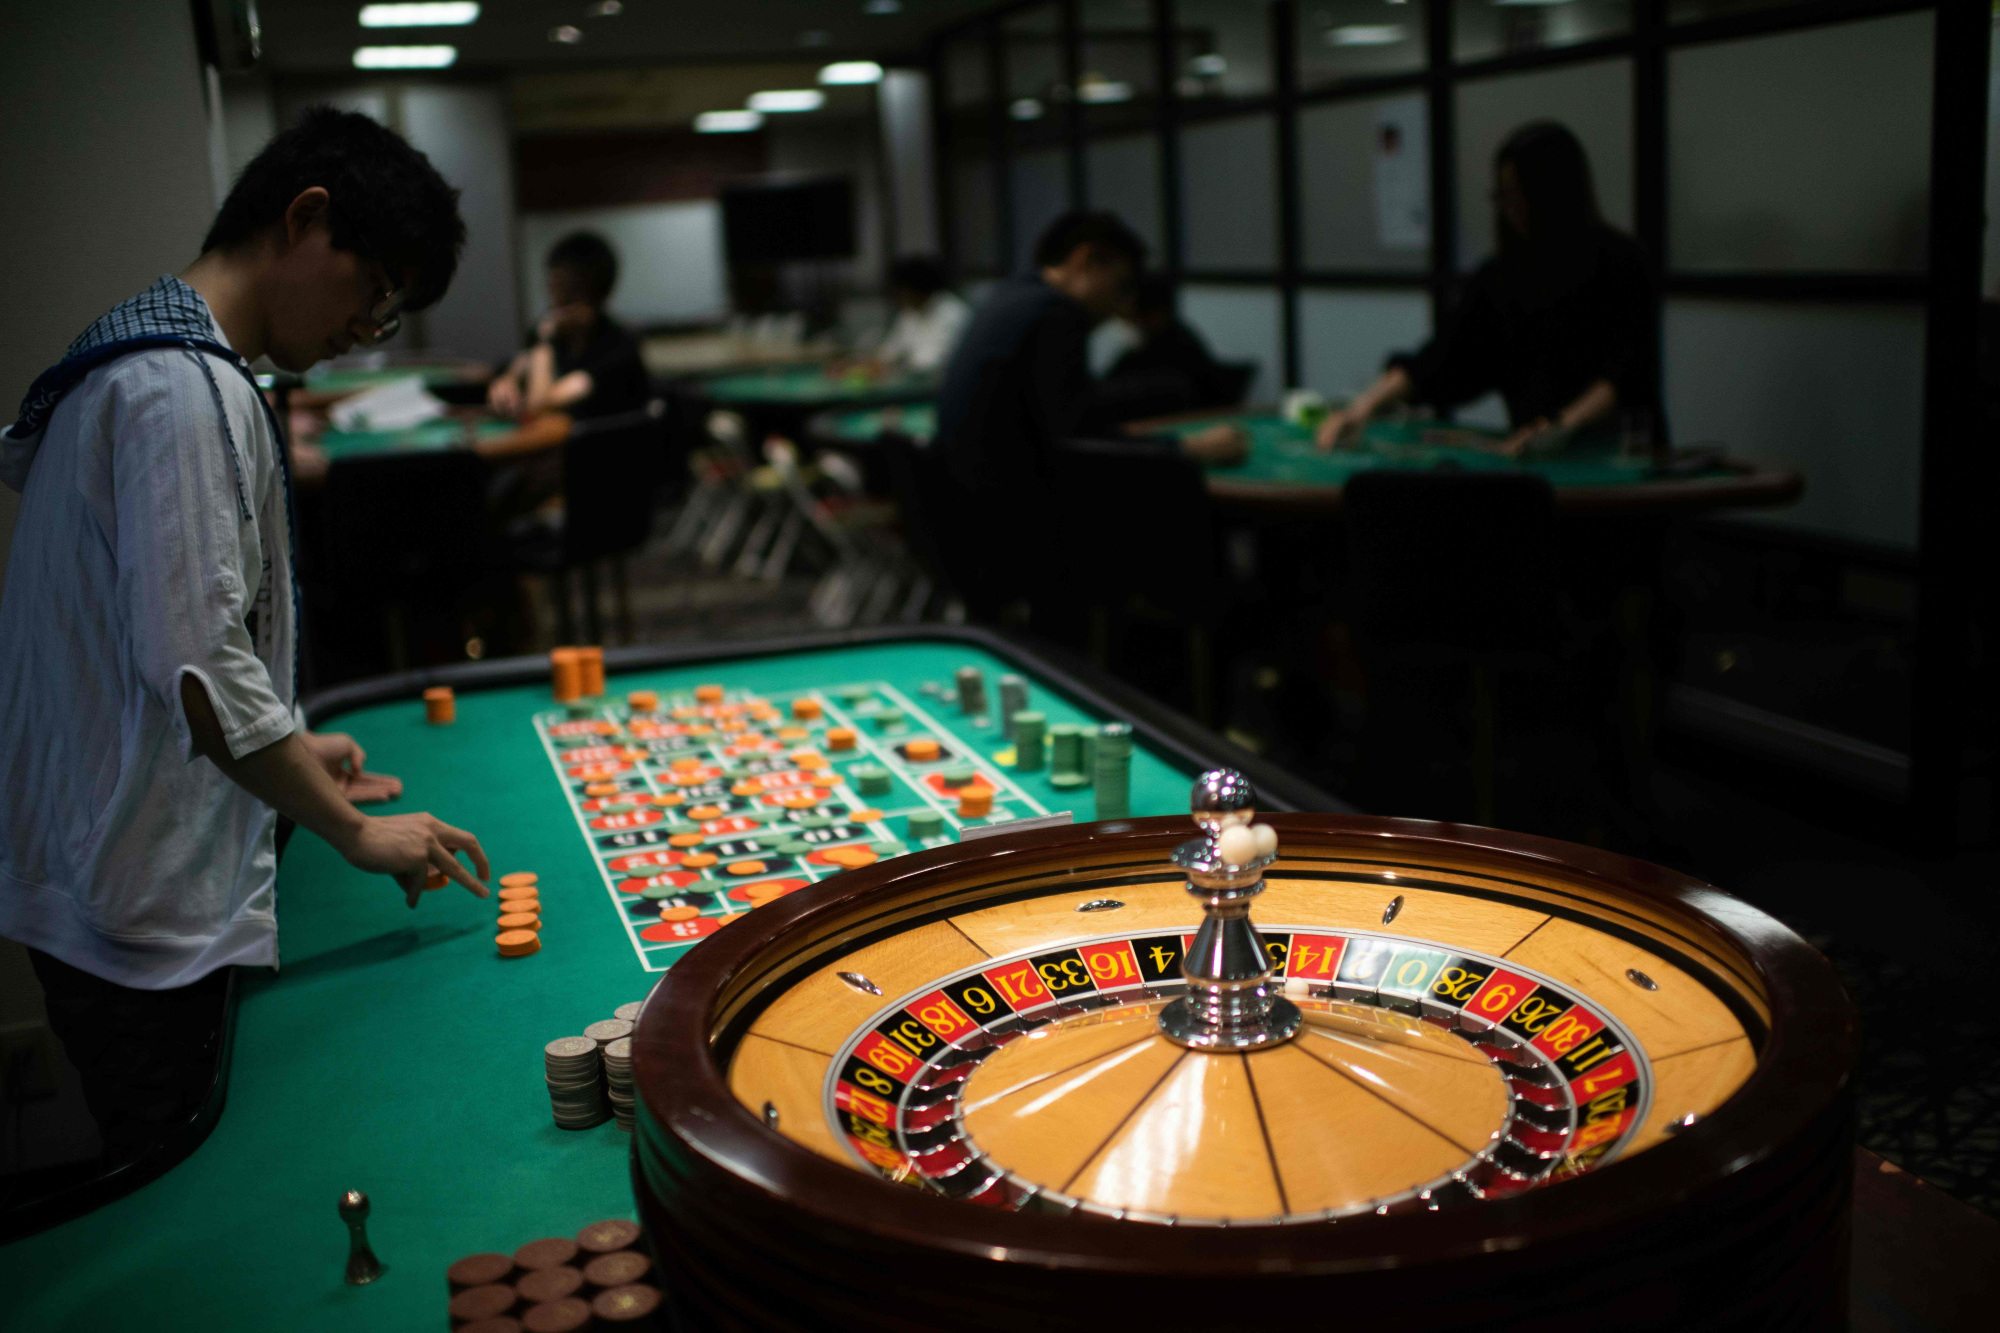 A student croupier practices dealing a game of roulette at the Japan Casino School in Tokyo on June 6. | AFP-JIJI